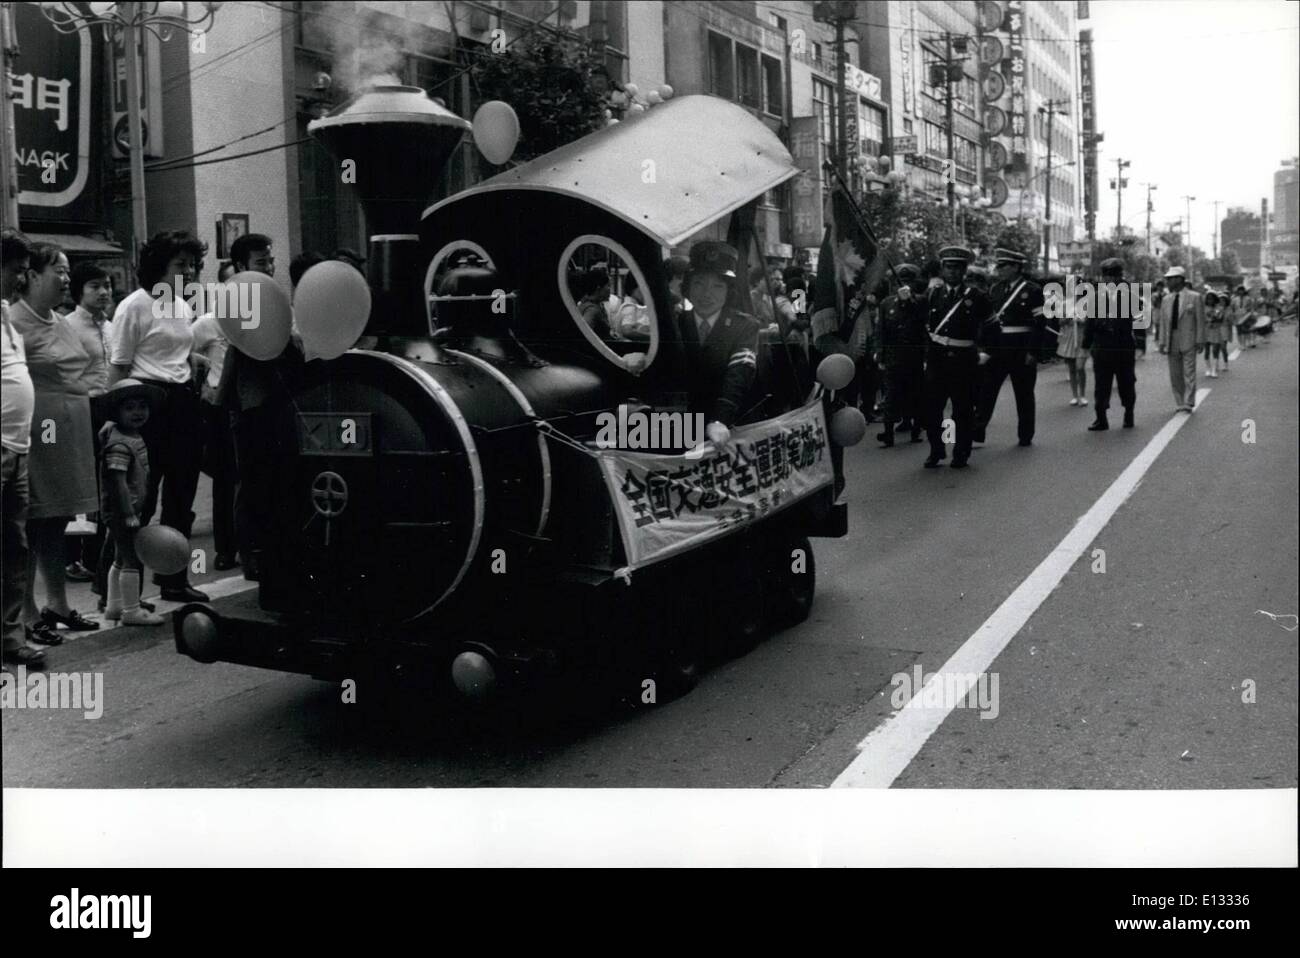 Feb. 26, 2012 - Old Style of Steam engine for the Traffic safety Campaign.: Driven by a policewoman, specially made steam engine goes through the busy street in Ikebukuro, downtown of Tokyo, showing the Traffic Safety Campaign. Stock Photo